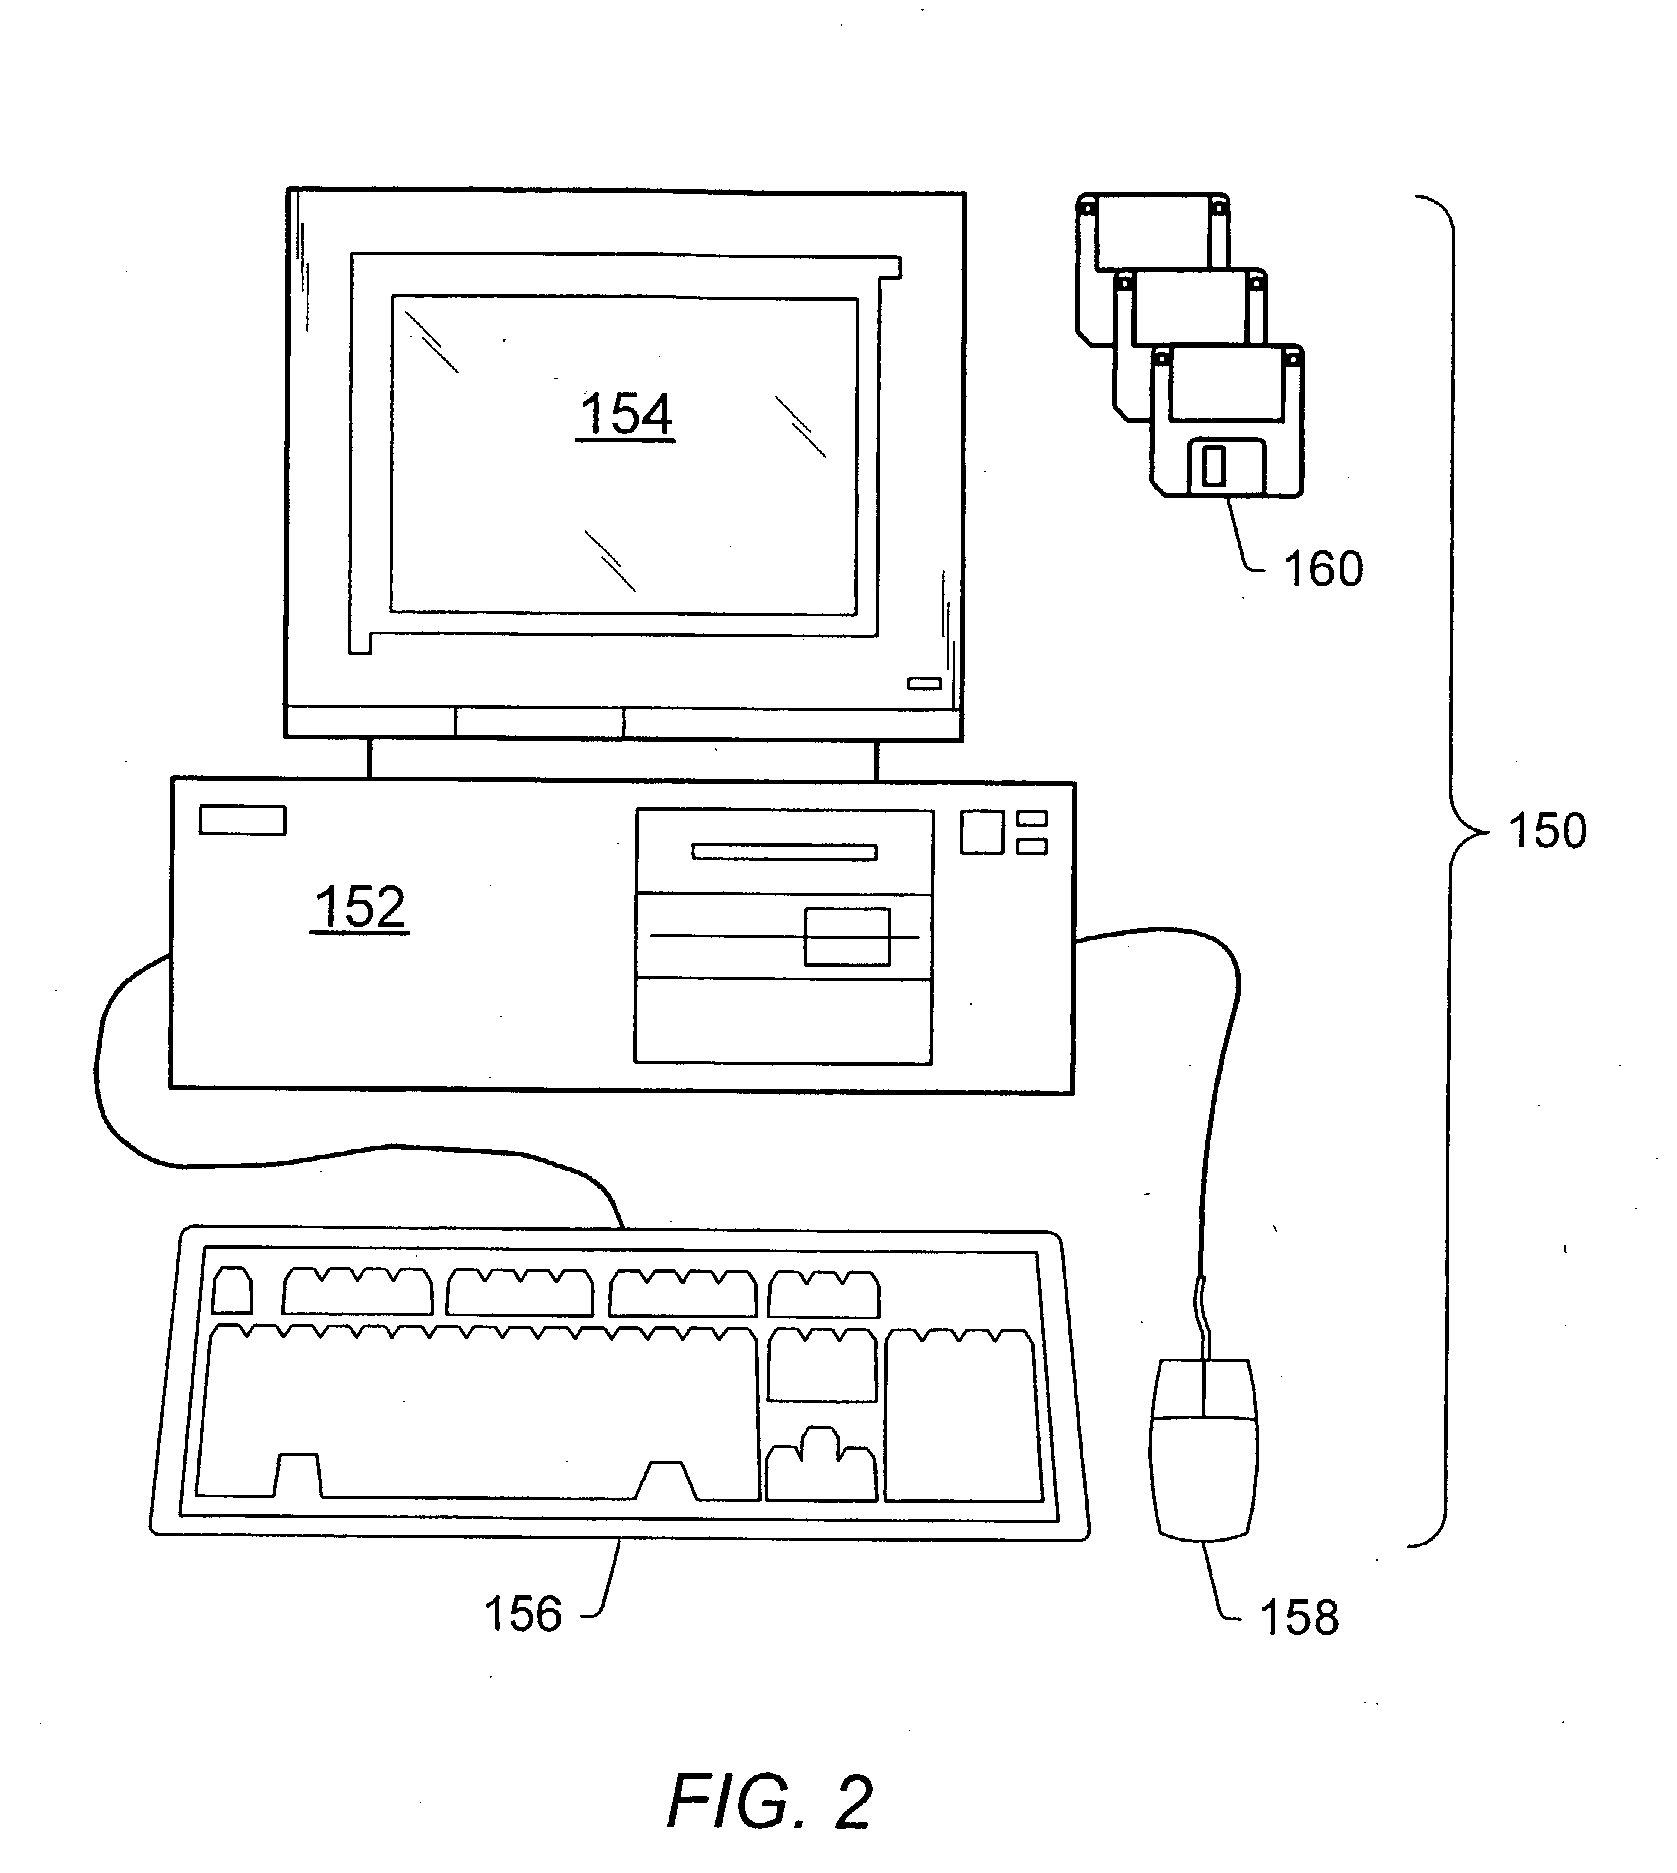 Computerized method and system for creating pre-configured claim reports including liability in an accident estimated using a computer system